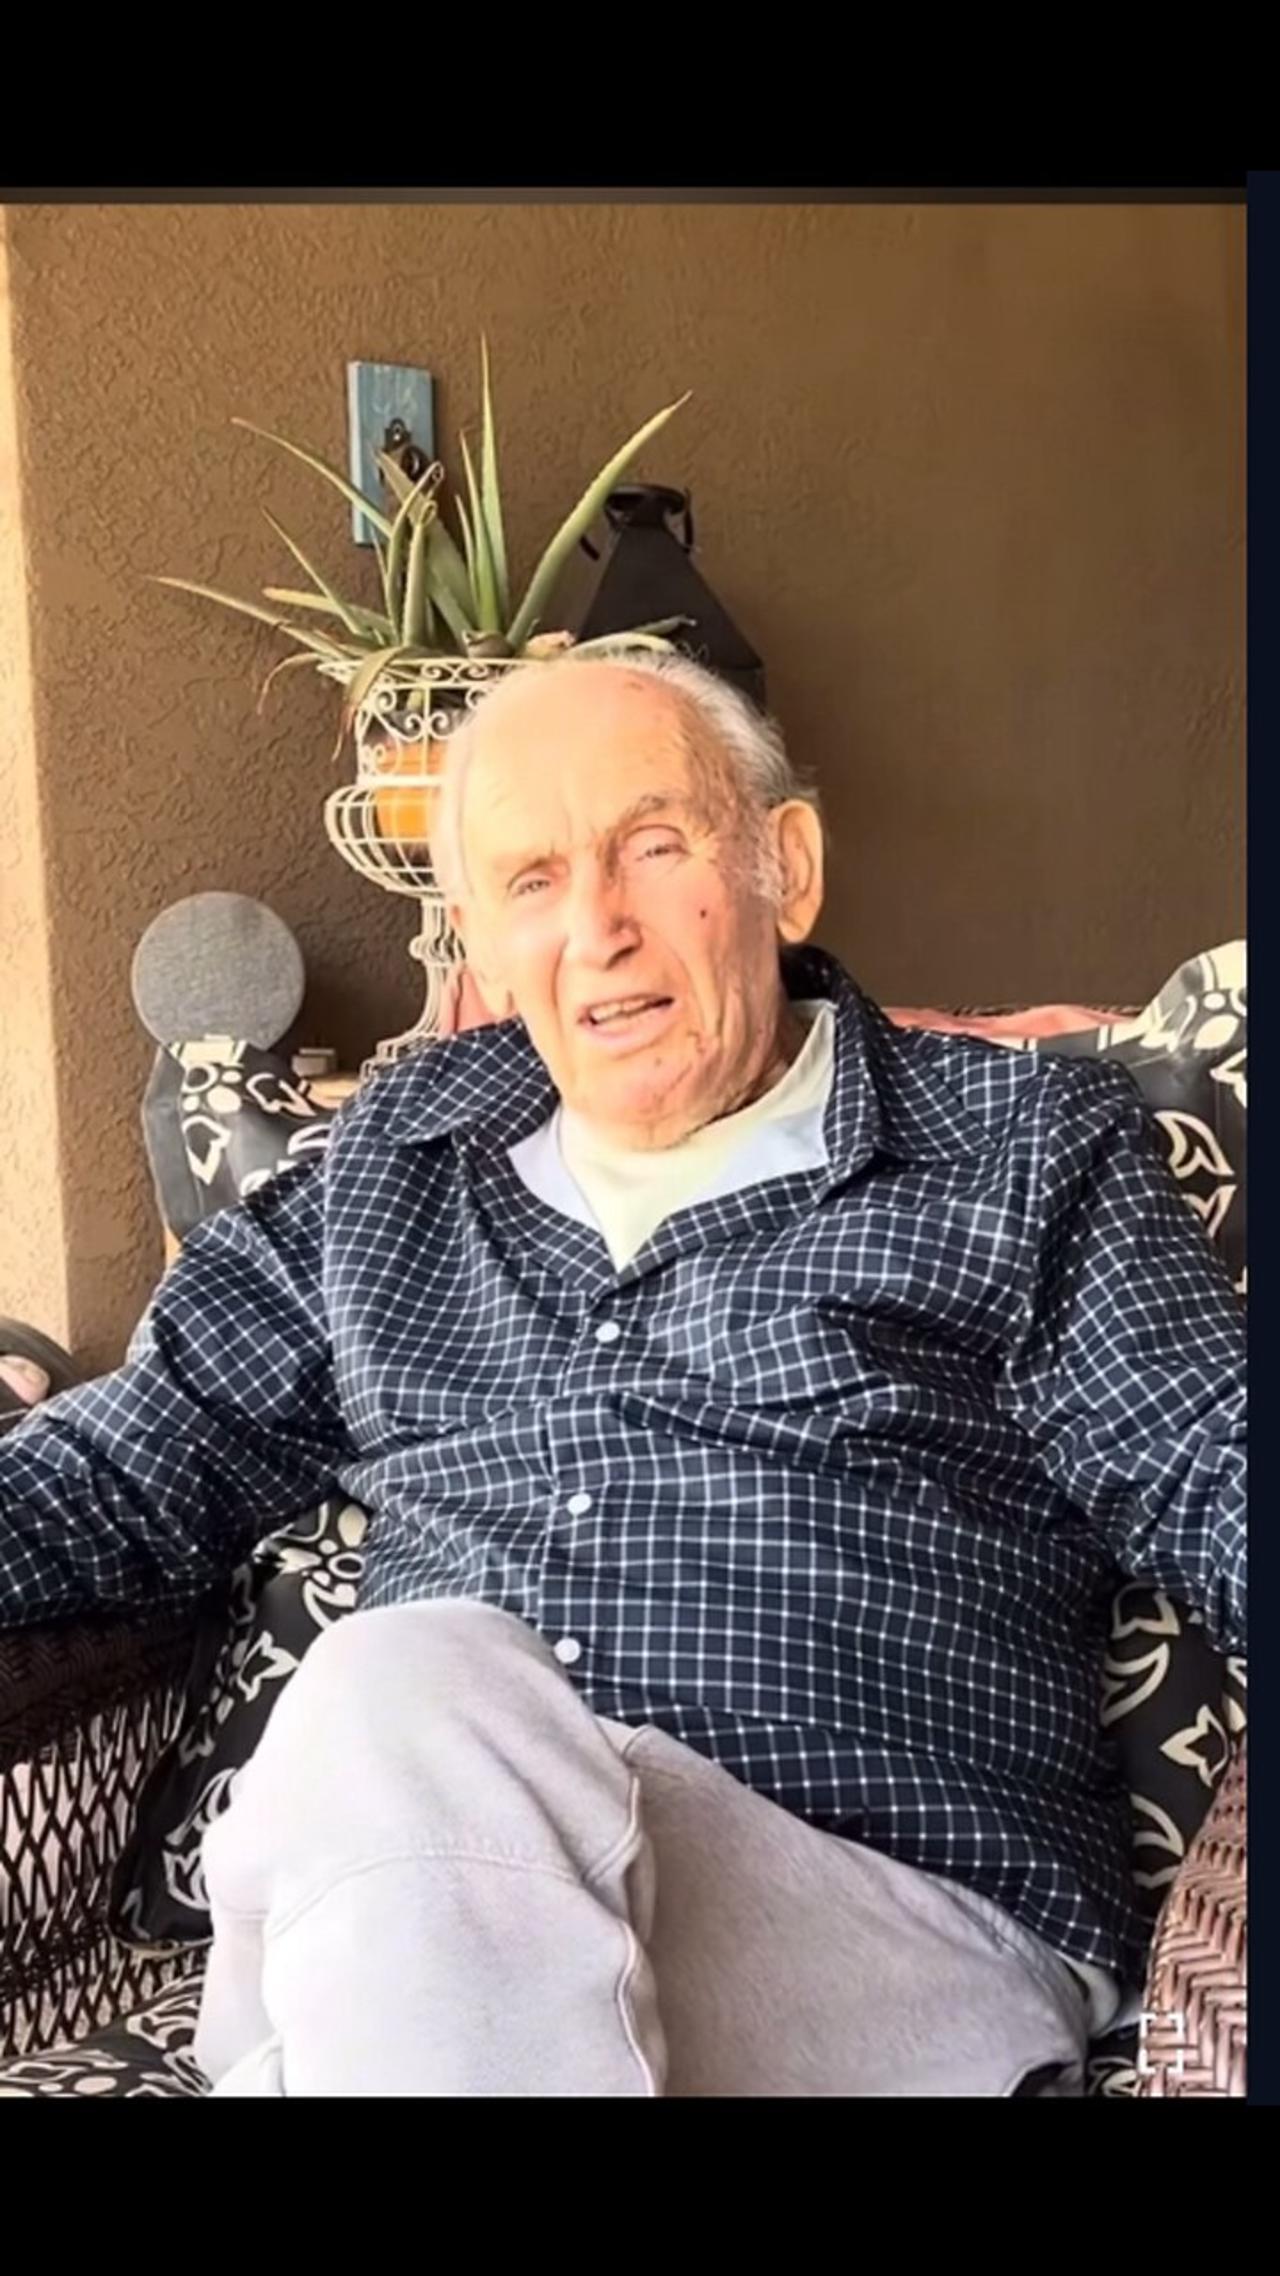 Pops at 91 years old with Alzheimer’s can’t believe he is famous